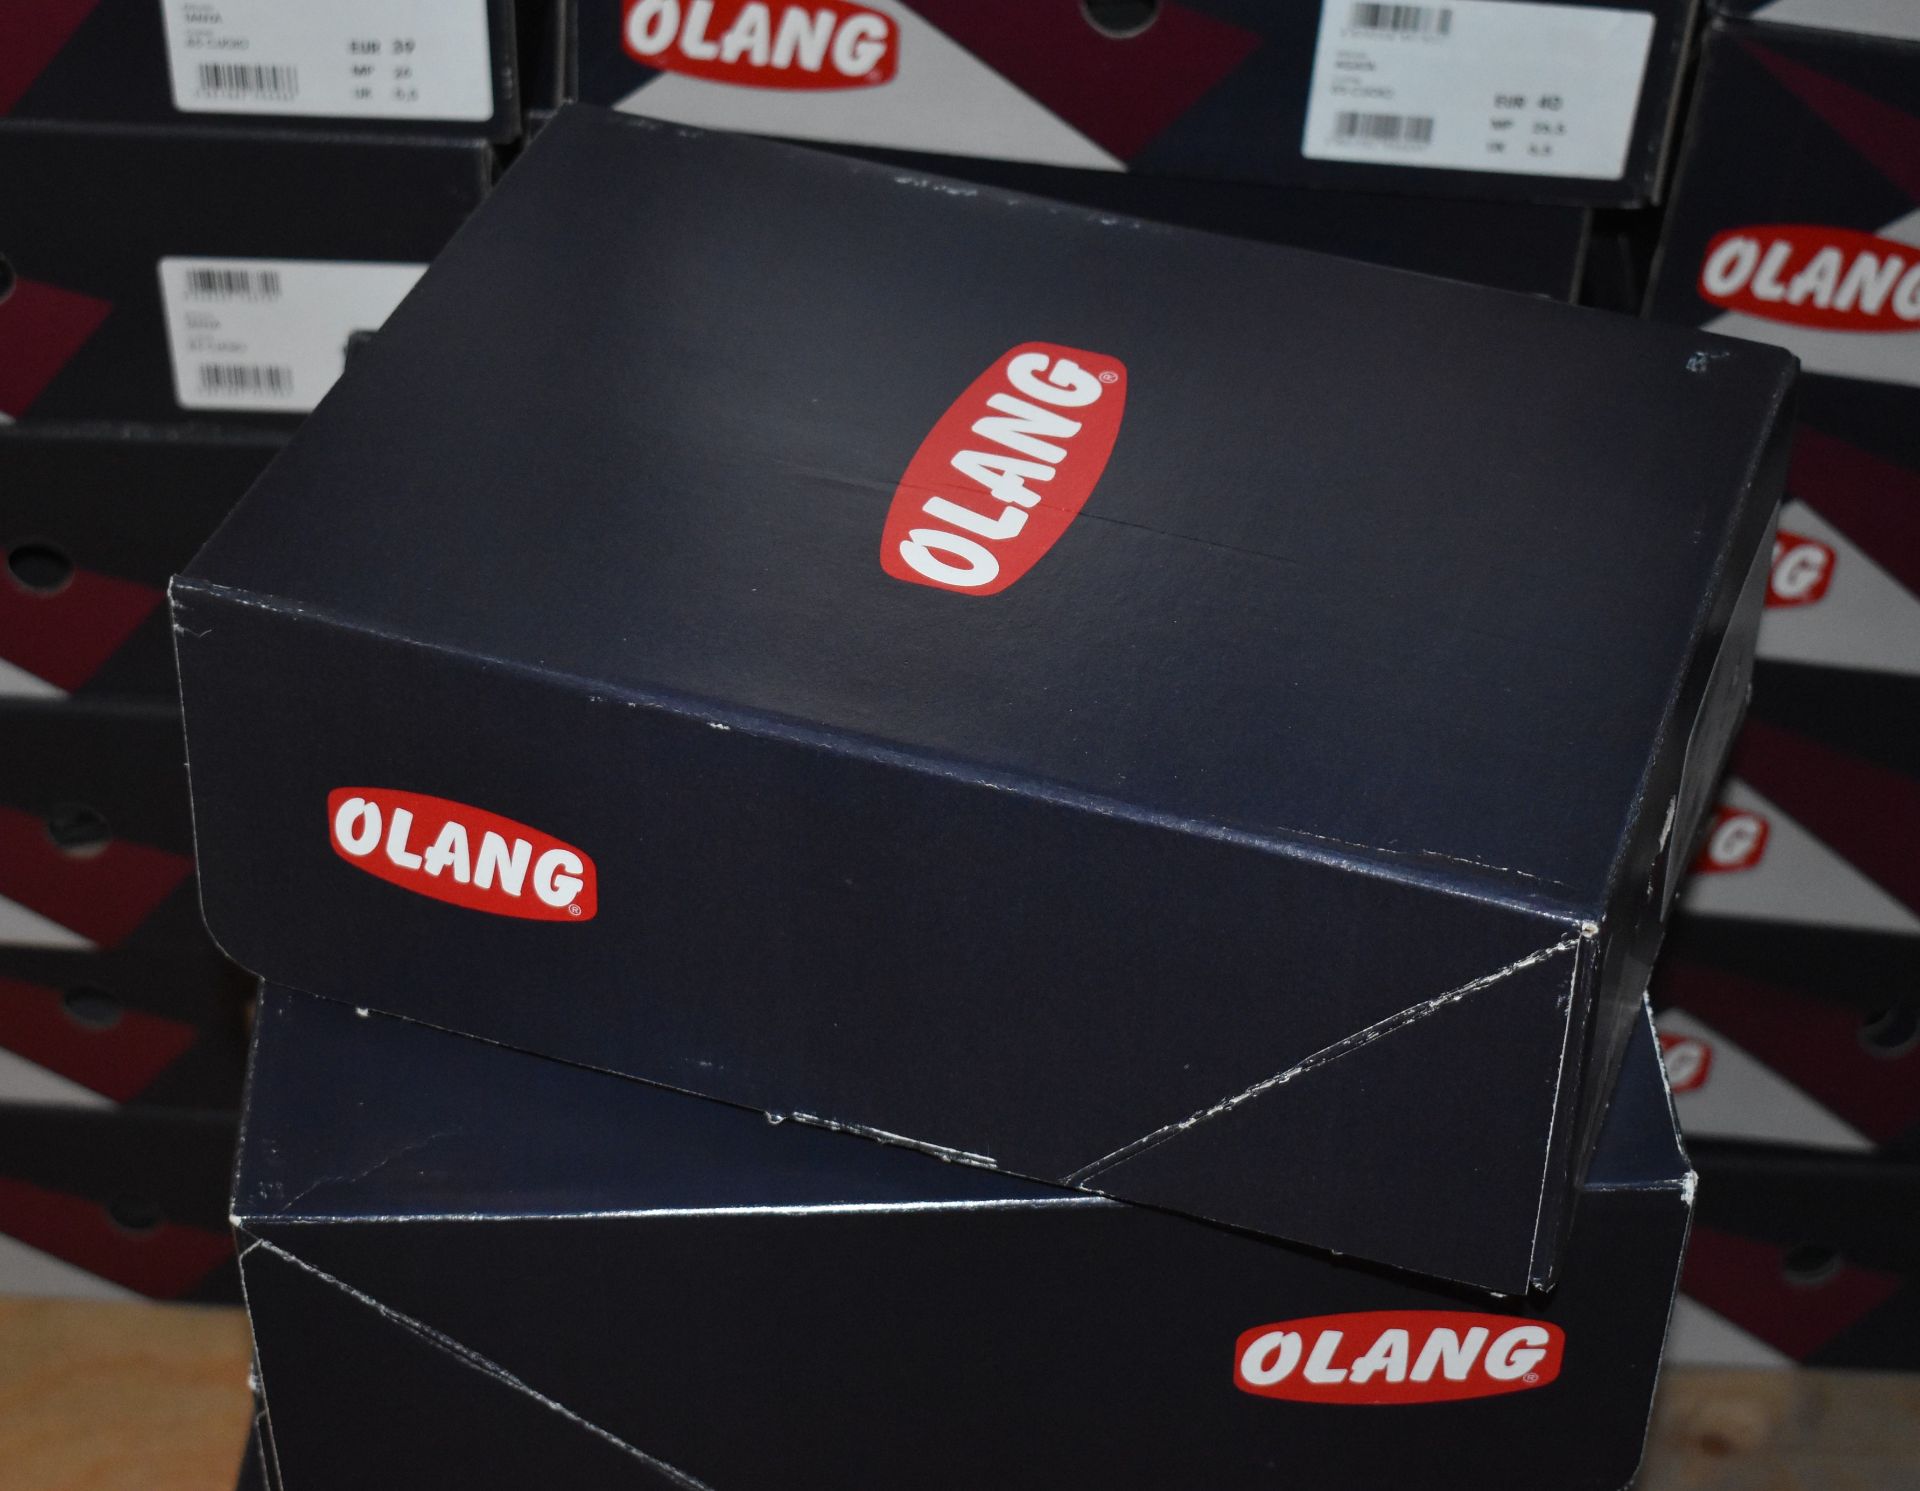 1 x Pair of Designer Olang Merano 82 Blu Women's Winter Boots - Euro Size 40 - Brand New Boxed Stock - Image 3 of 4